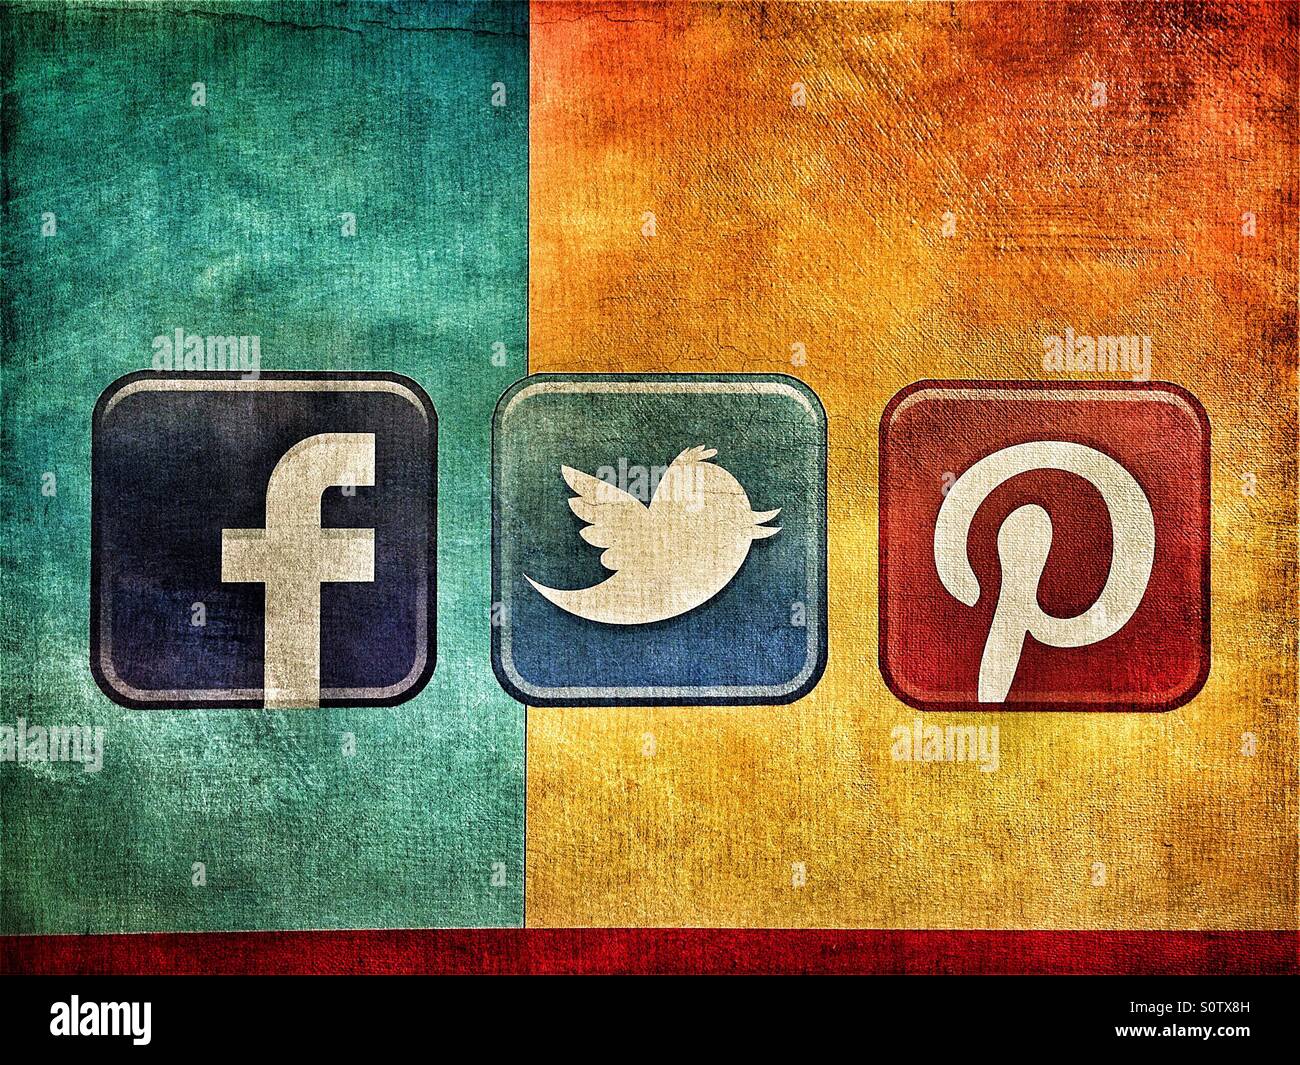 Social media logos (Facebook, Twitter, Pinterest) on a grungy colorful background Stock Photo